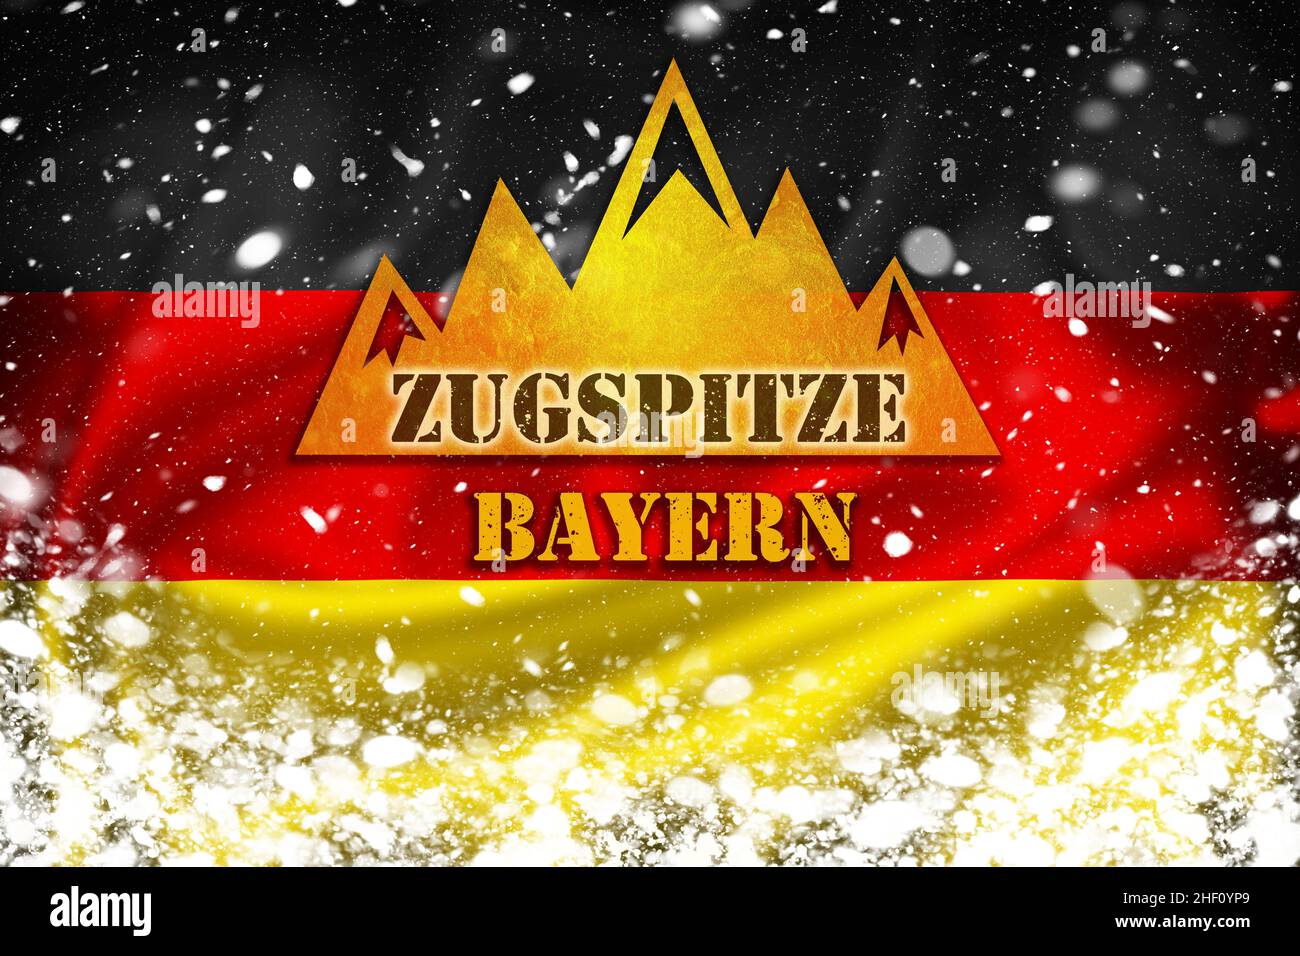 Zugspitze Bayern peak banner illustration on German flag and snow layer, famous destination in Alps, Germany Stock Photo